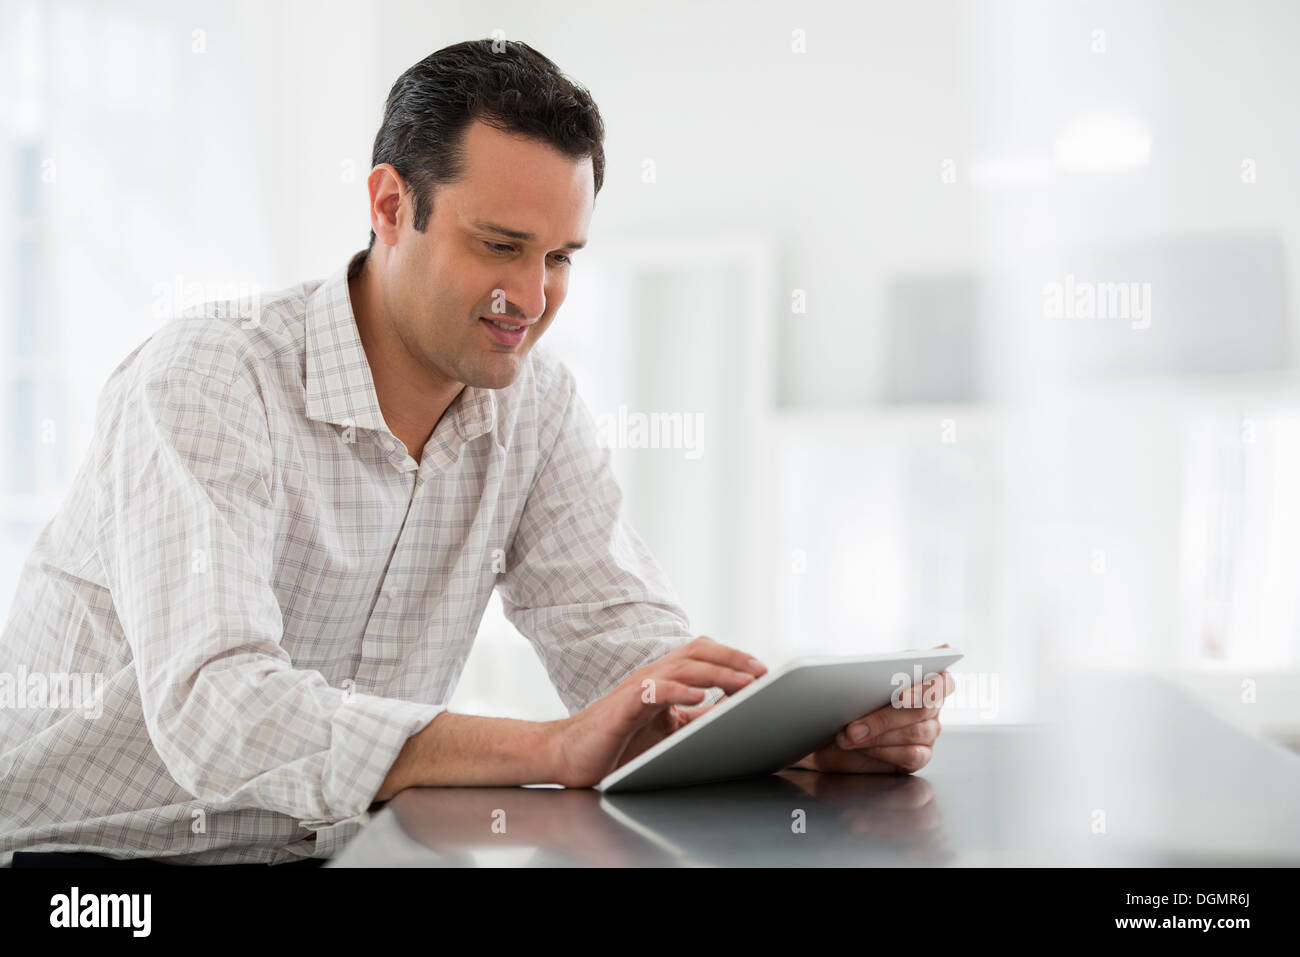 Office interior. A man seated at a table, using a digital tablet. Stock Photo